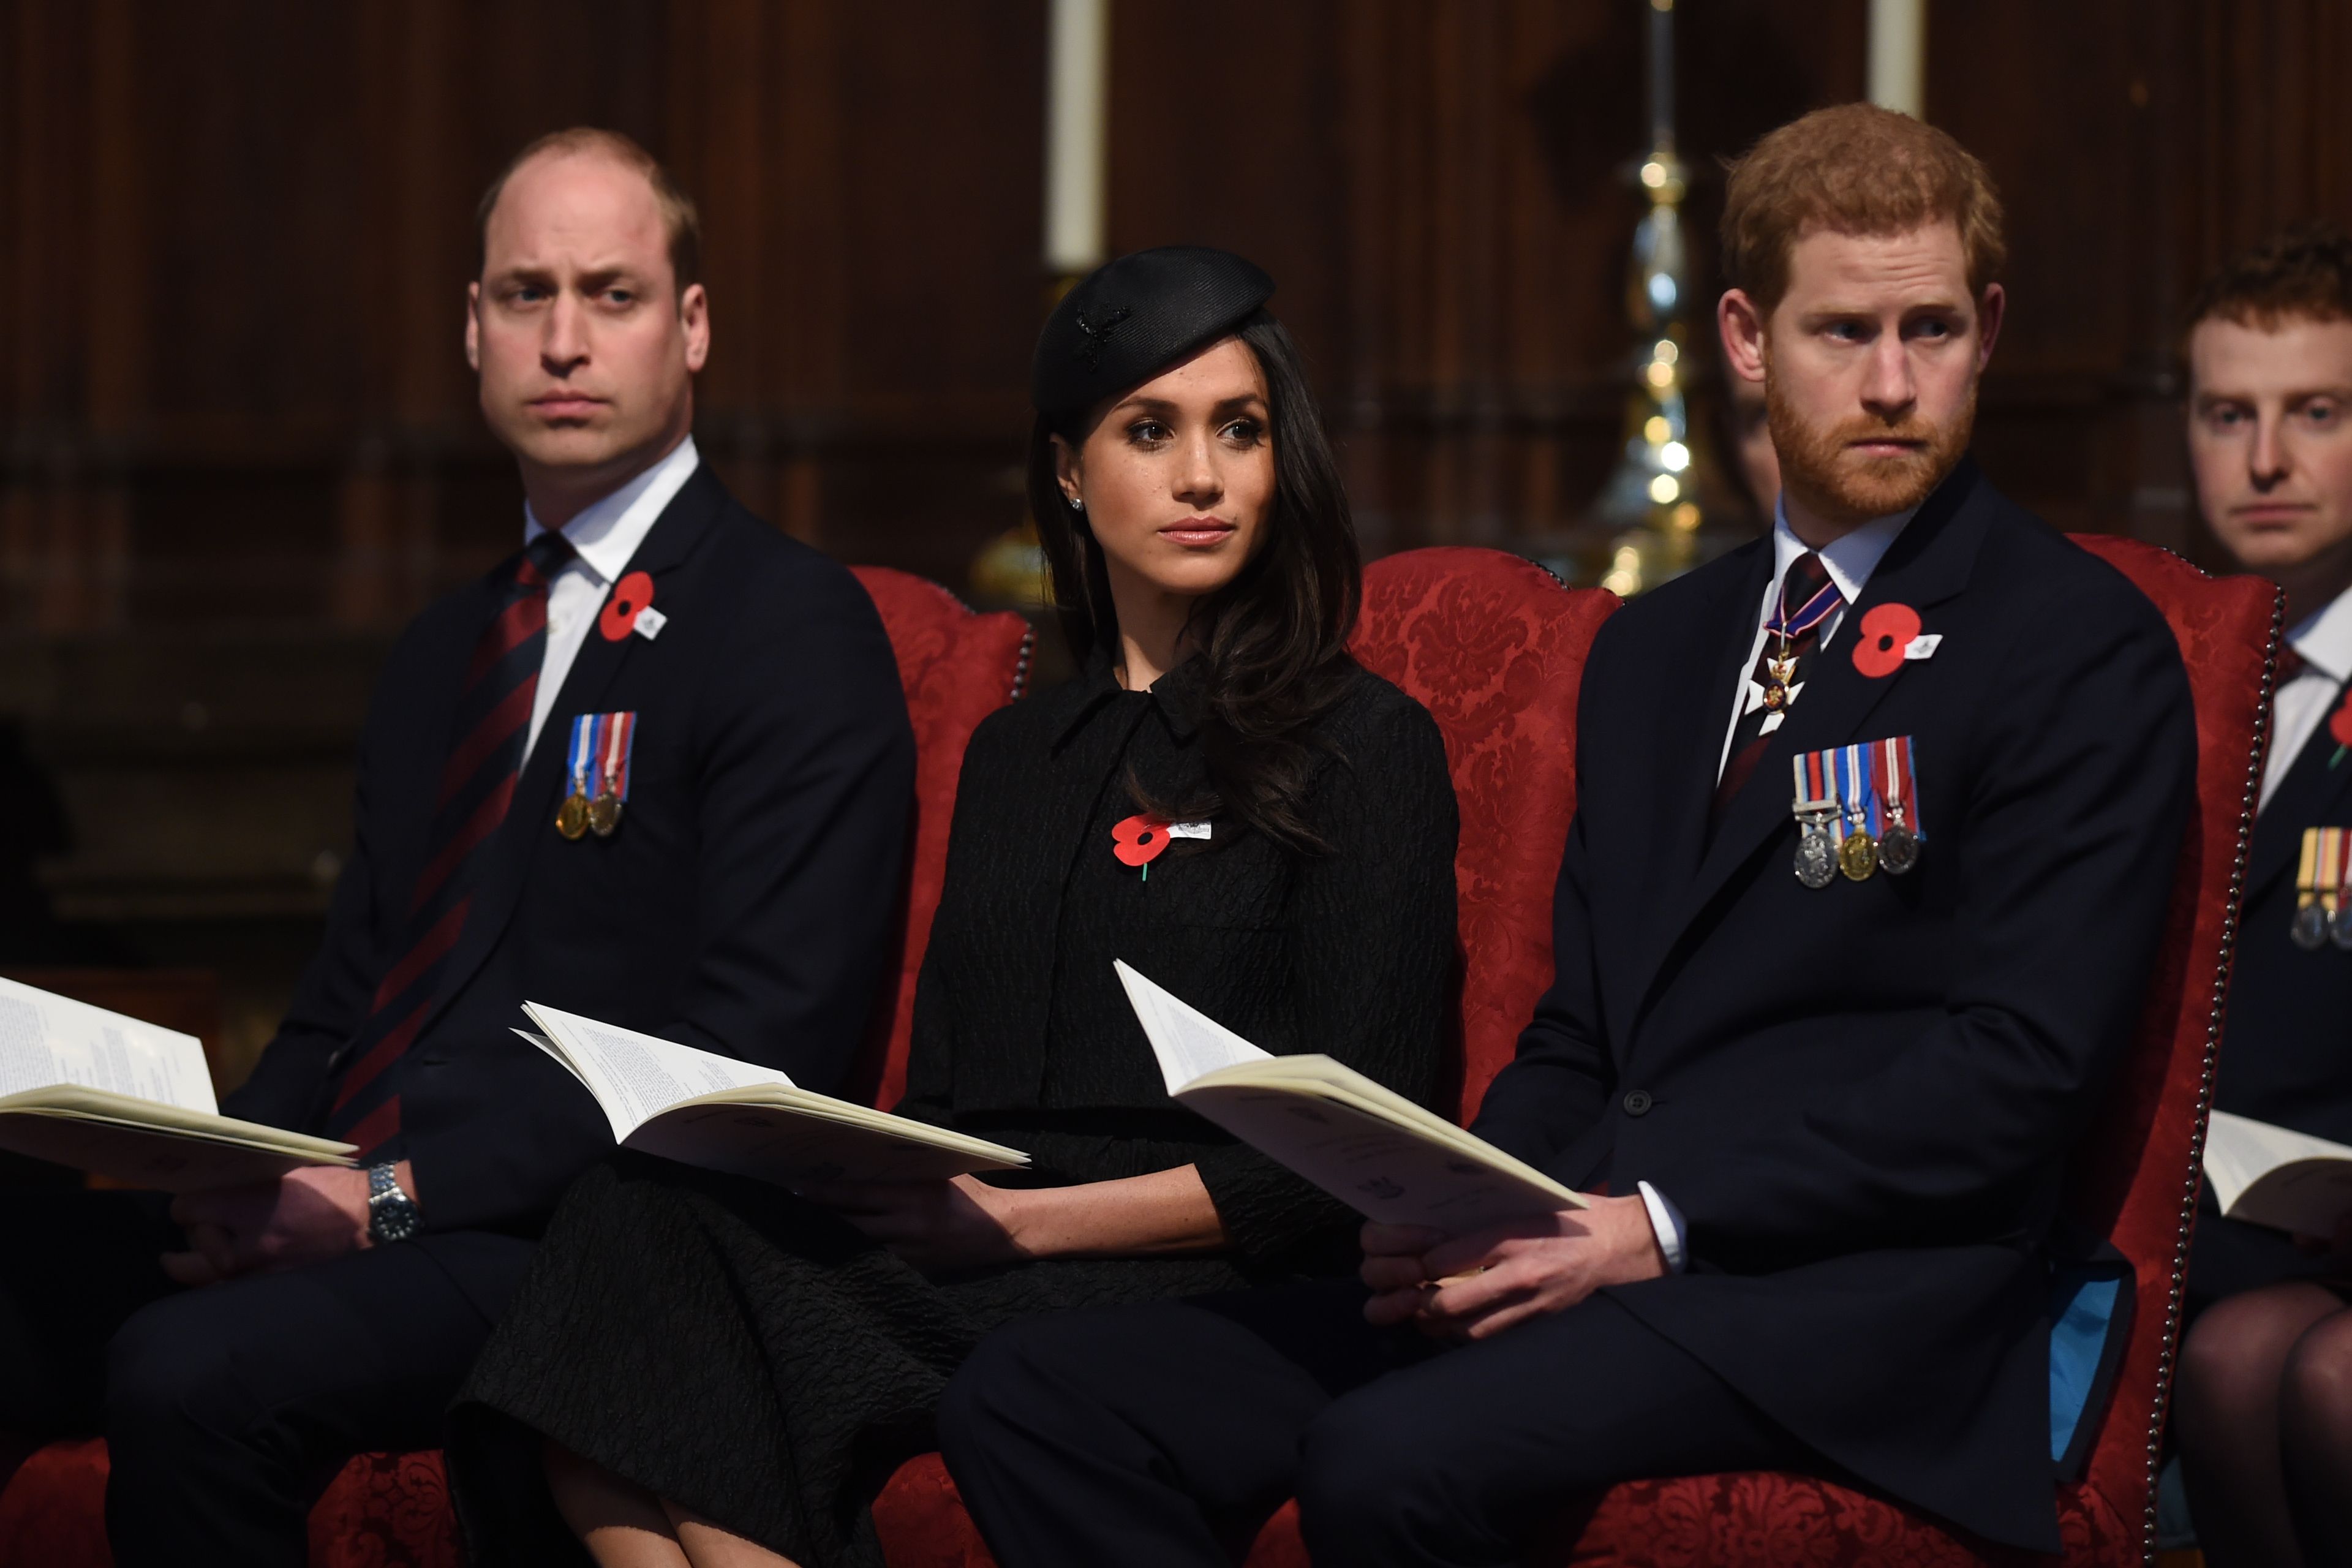 Prince William, Duke of Cambridge, Meghan Markle and Prince Harry attend an Anzac Day service at Westminster Abbey on April 25, 2018 in London, England. | Source: Getty Images